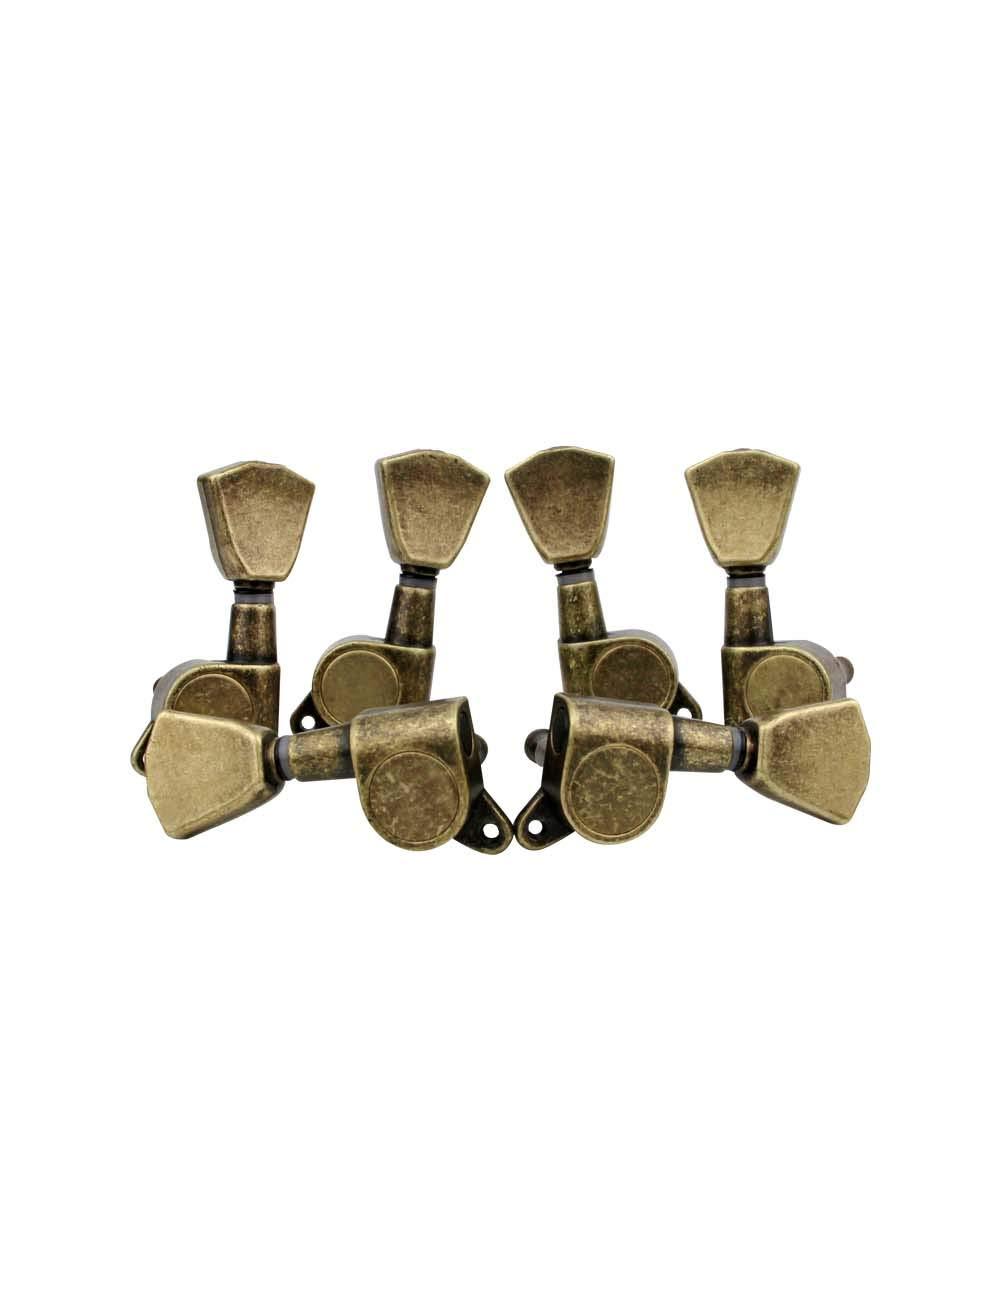 Guyker 6Pcs Guitar Machine Heads (3 for Left + 3 for Right Hand) - 1:15 String Tuning Key Peg Tuners Replacement for Electric or Acoustic Guitars (Antique Brass) Antique Brass